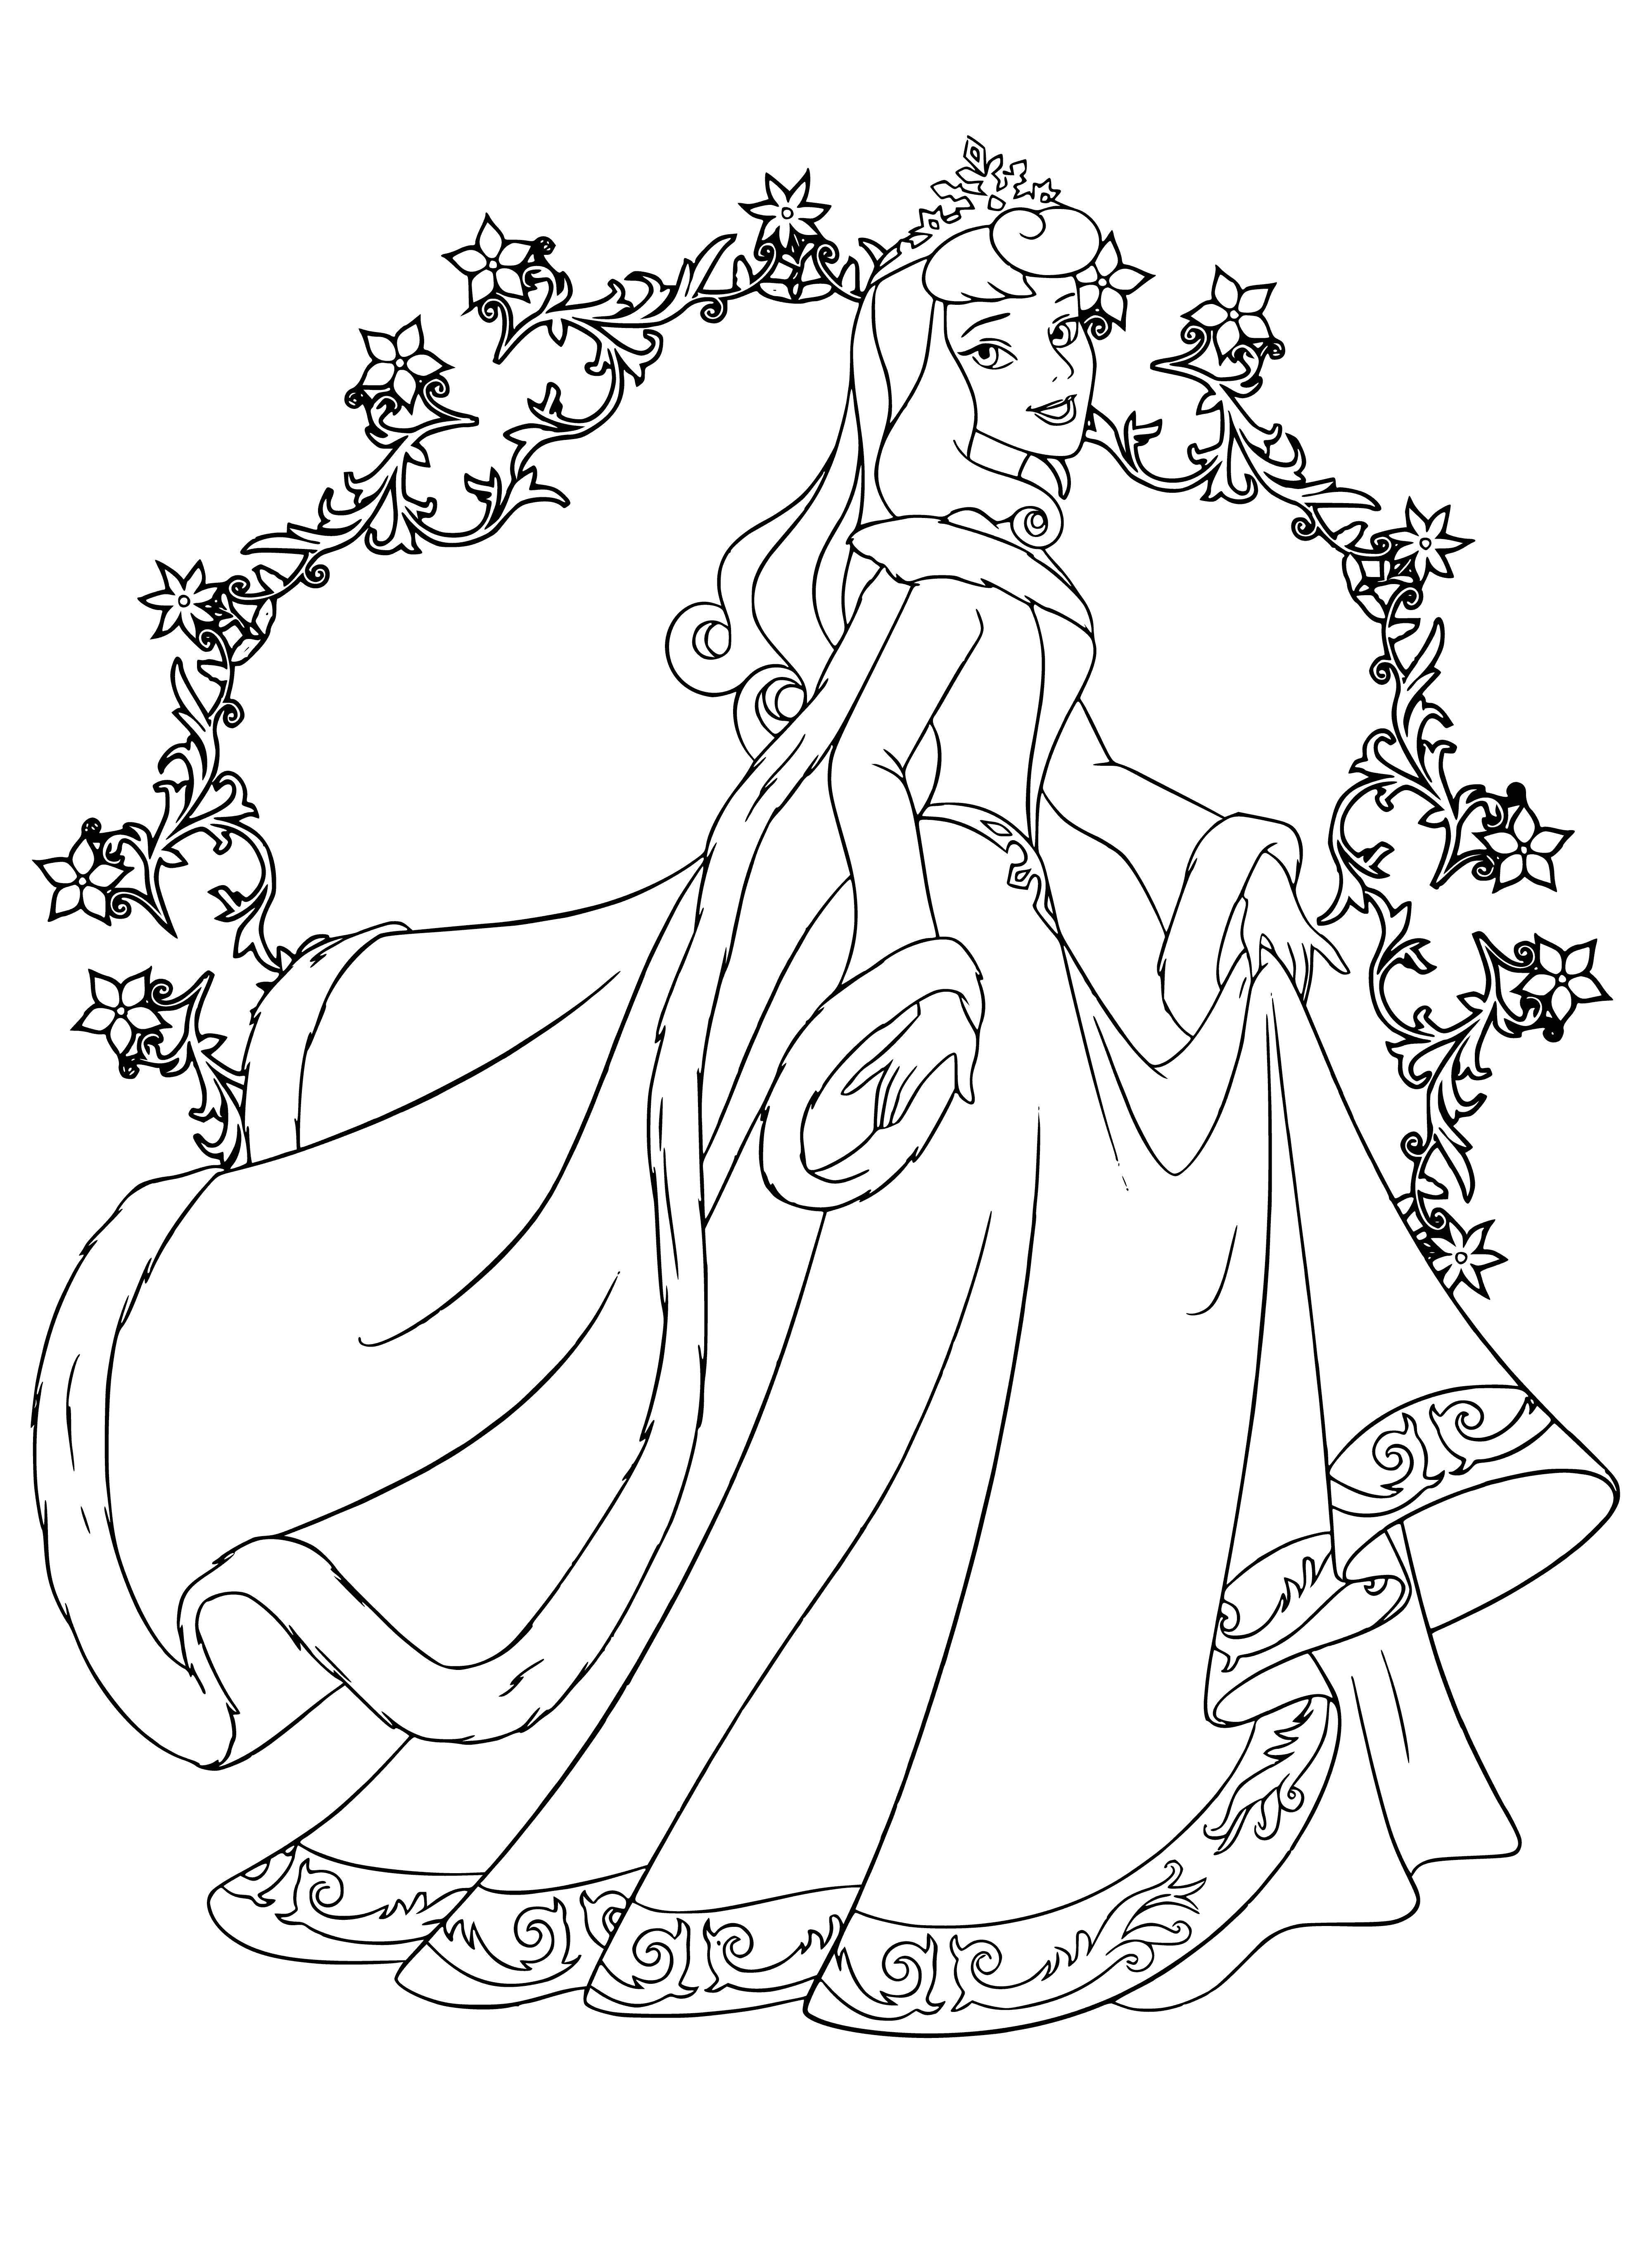 Aurora's Winter Outfit coloring page